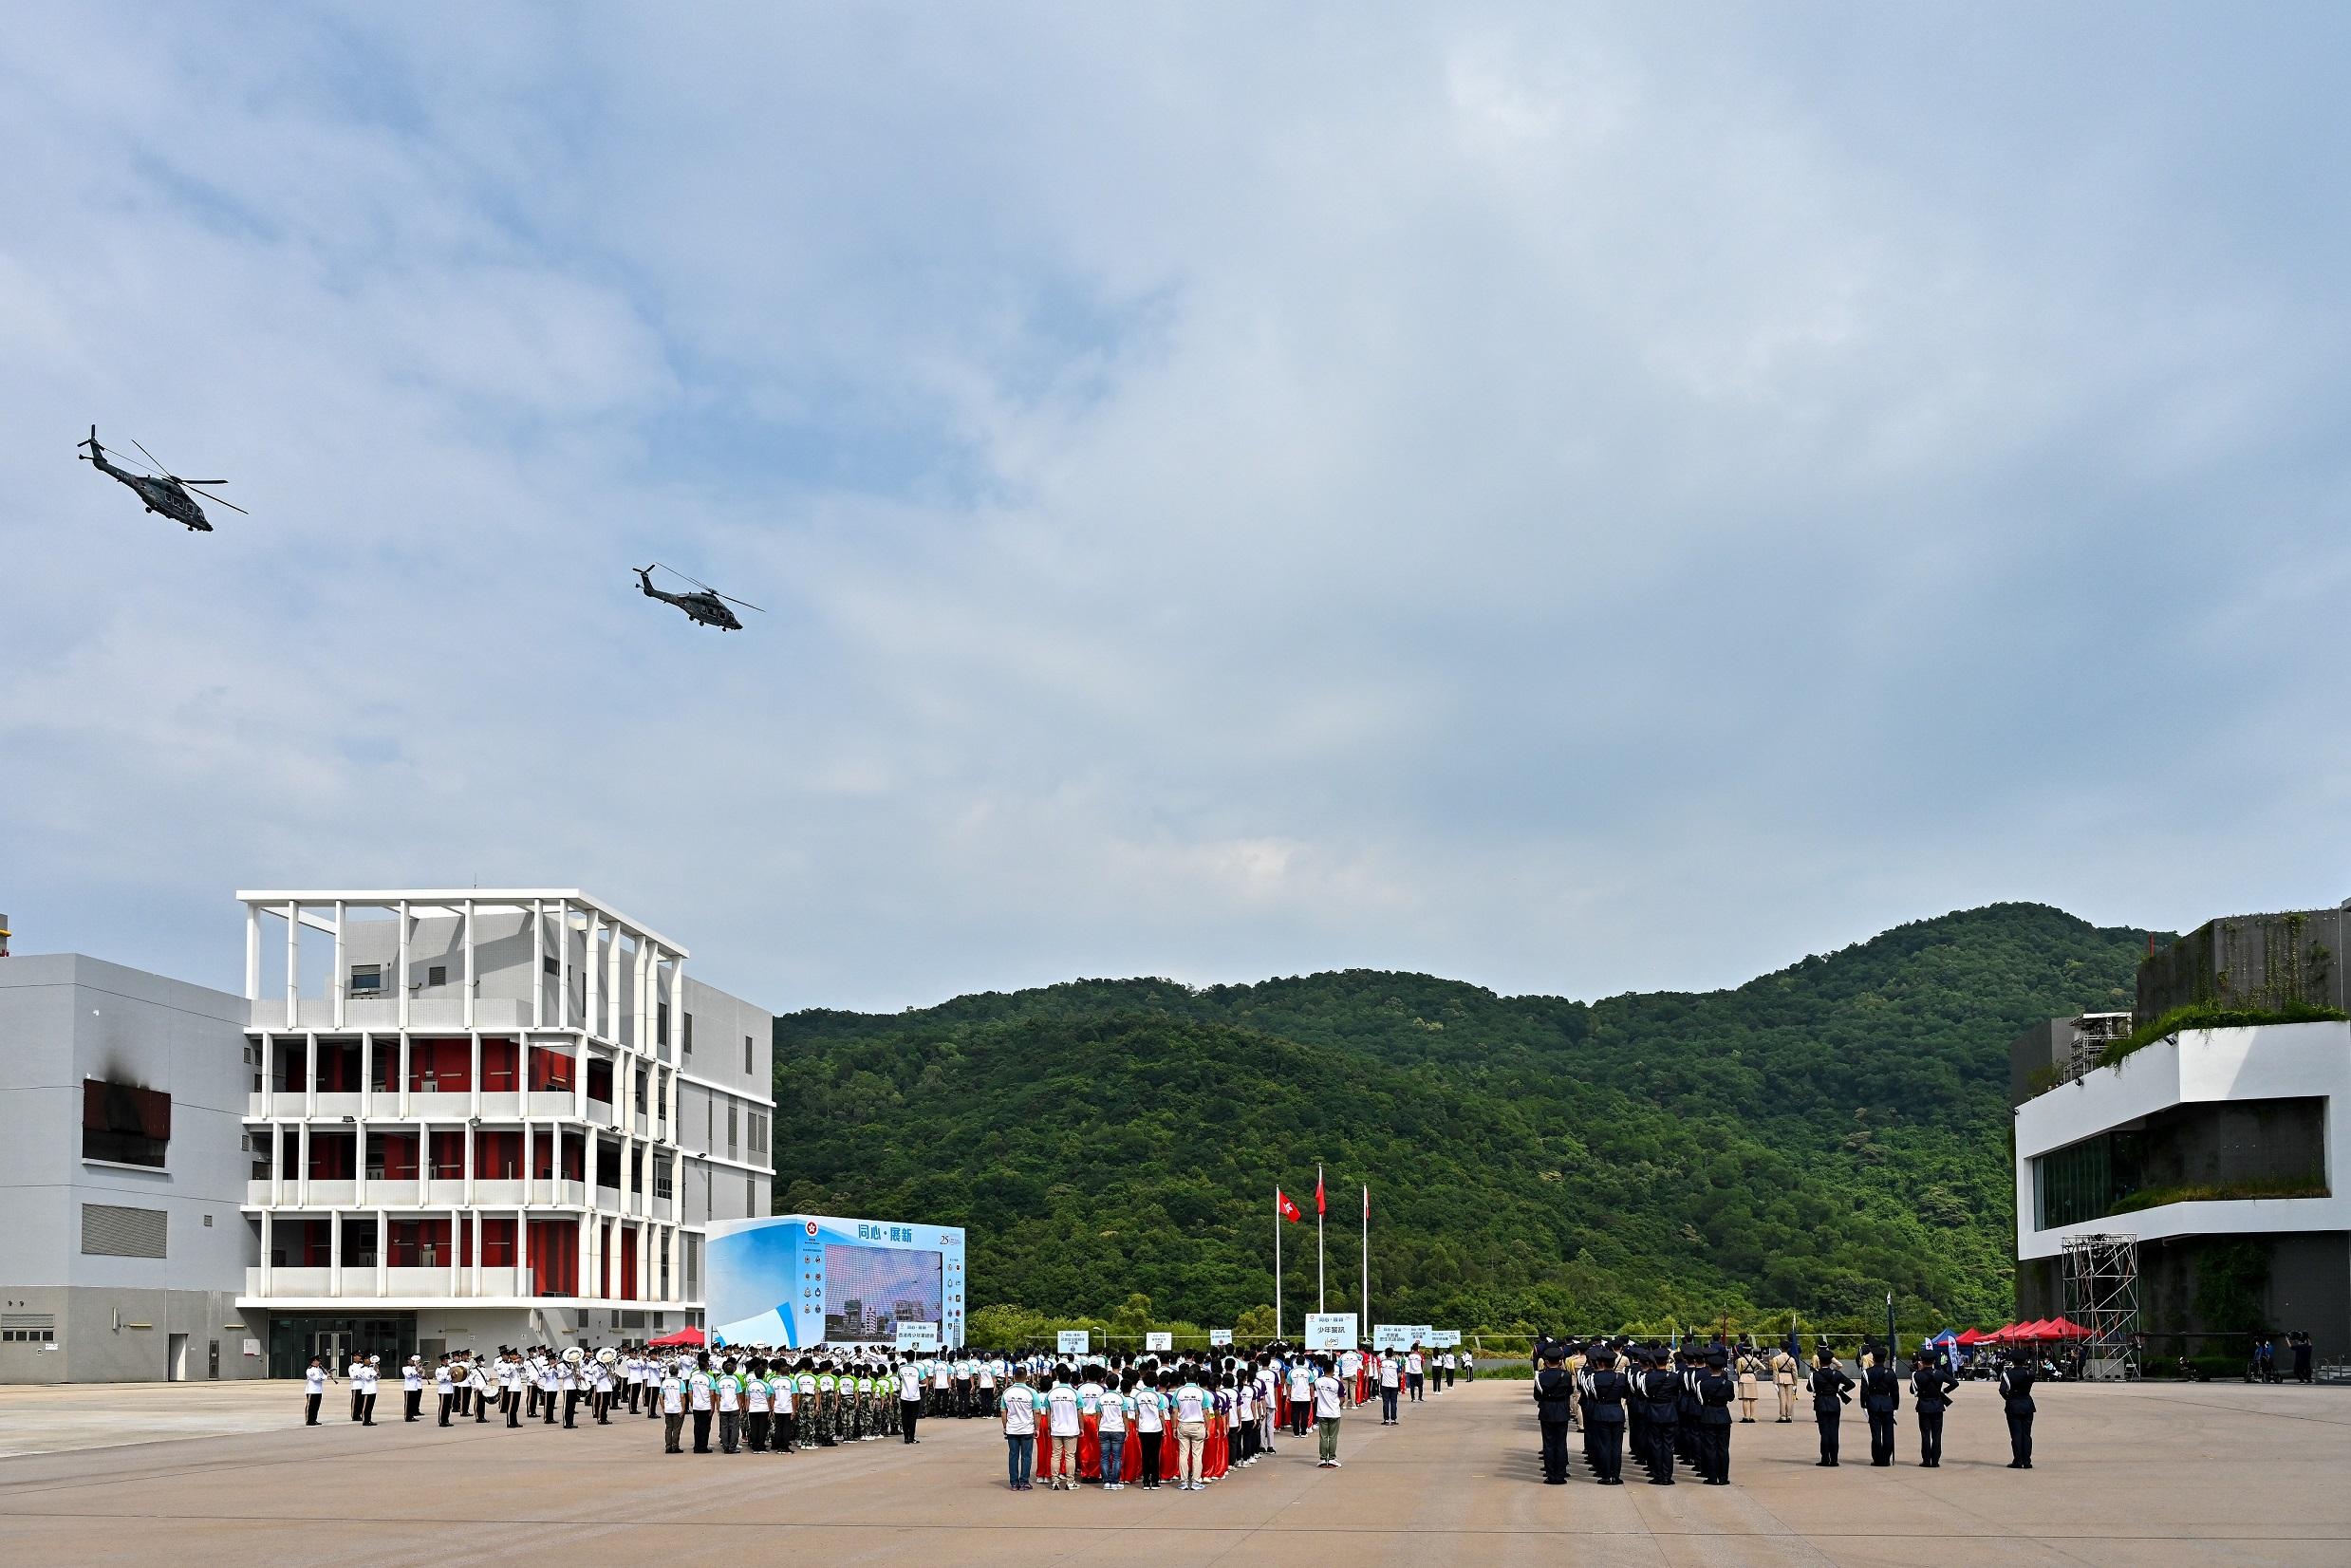 The Security Bureau led the disciplined services, auxiliary services and nine youth groups to hold the "Together We Prosper" Grand Parade by Disciplined Services and Youth Groups for Celebrating the 73rd Anniversary of the Founding of the People’s Republic of China and the 25th Anniversary of the Establishment of the Hong Kong Special Administrative Region at the Fire and Ambulance Services Academy in Tseung Kwan O today (September 24). Photo shows the flag raising ceremony at the start of the grand paradewith performance of the Hong Kong Police Band, singing of the national anthem by the youth groups and a fly-past by the GFS helicopters.